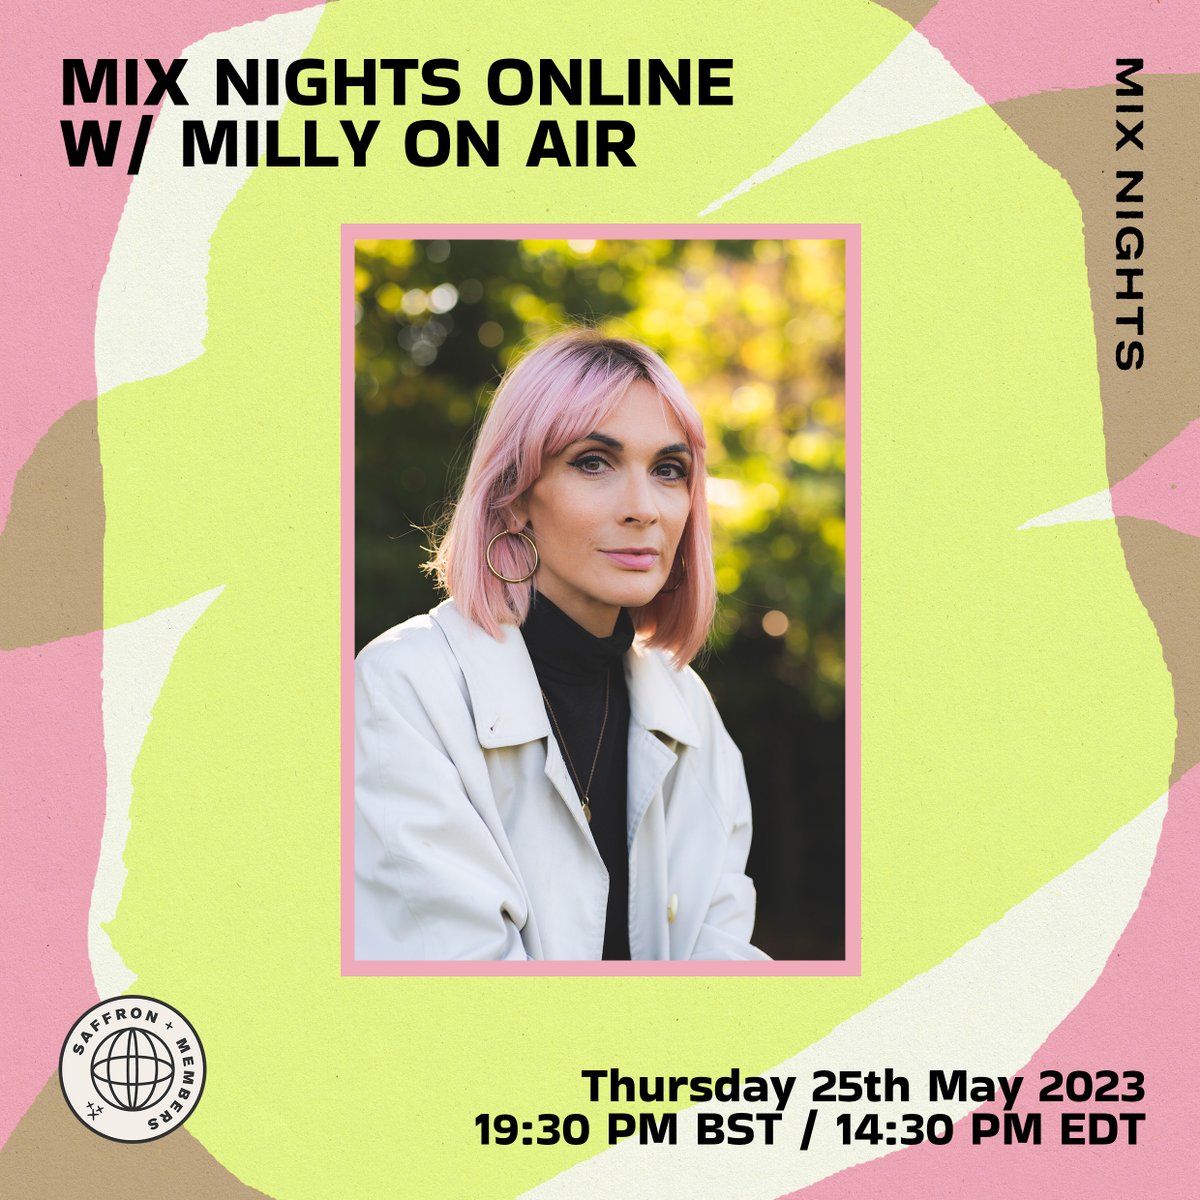 Are you a DJ looking to start your own radio show or podcast? 🎙️ DJ, podcaster, BBC radio presenter and producer @Milly_on_Air will be sharing insights from across her extensive career in this month's Mix Nights Online. More info & tickets: eventbrite.co.uk/e/mix-nights-o…